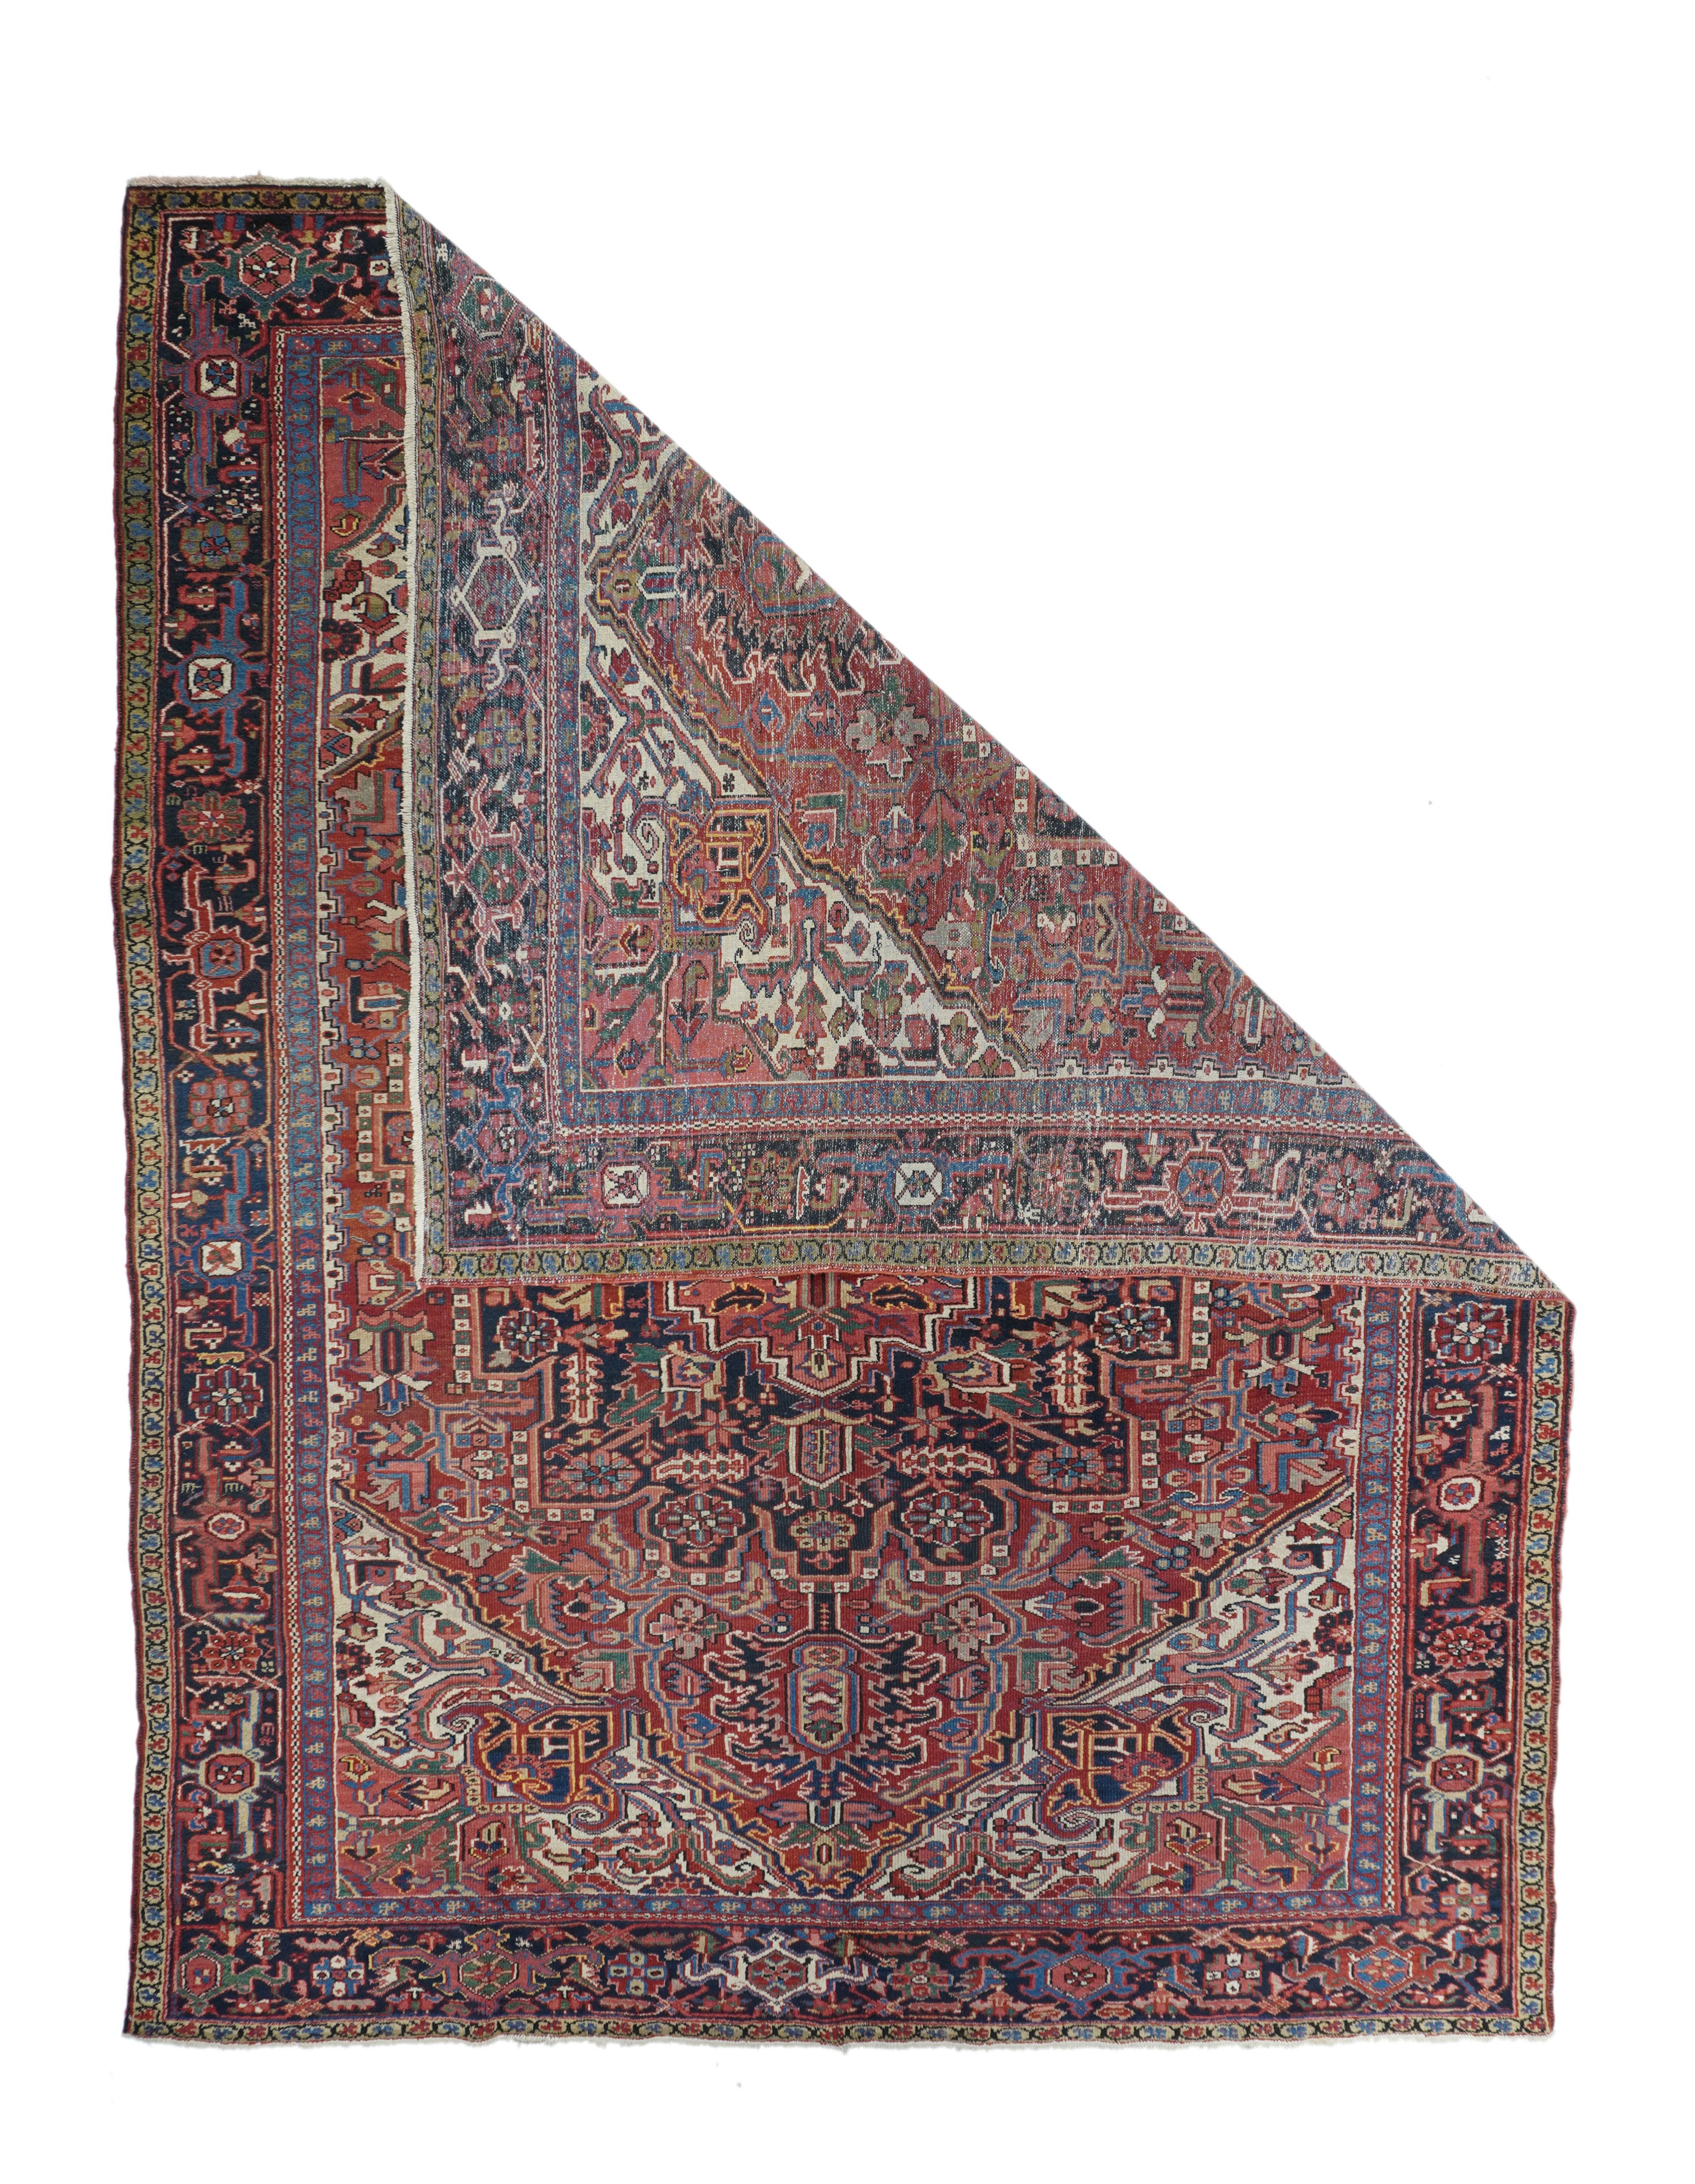 Vintage Heriz Rug 8'3'' x 11'2''. This Ahar-quality NW Persian rustic weaving shows a madder red laterally notched subfield on a cream field with palmette corner projections and volute forked arabesques. Elaborately stepped navy medallion with